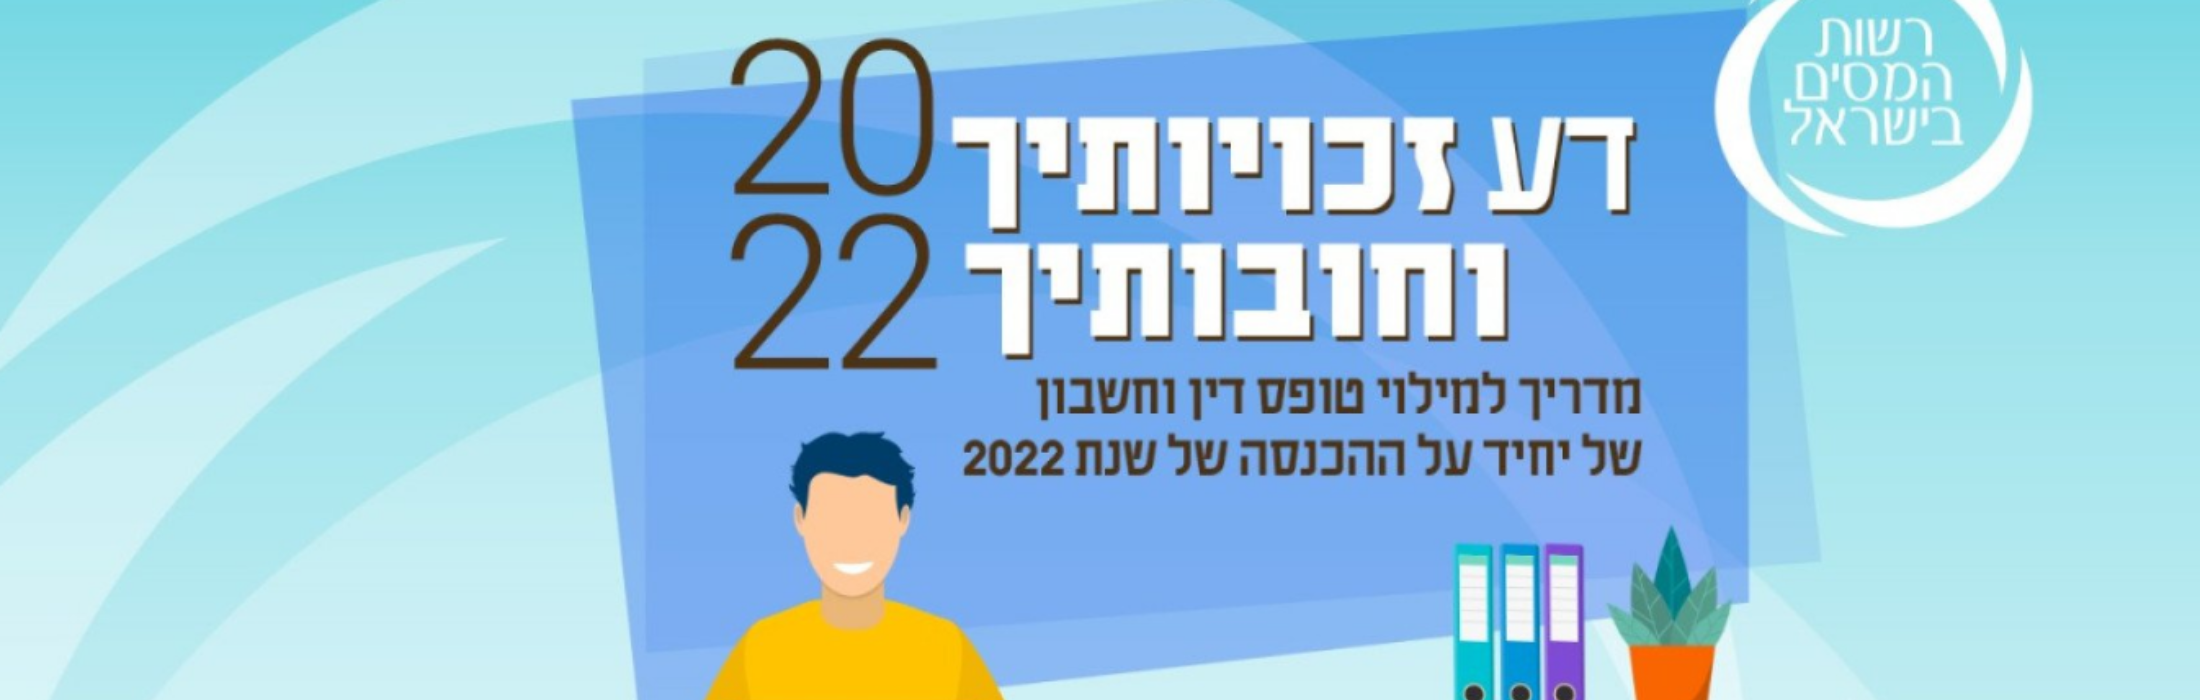 https://www.michpalyeda.co.il/wp-content/uploads/2023/05/מס-הכנסה.png